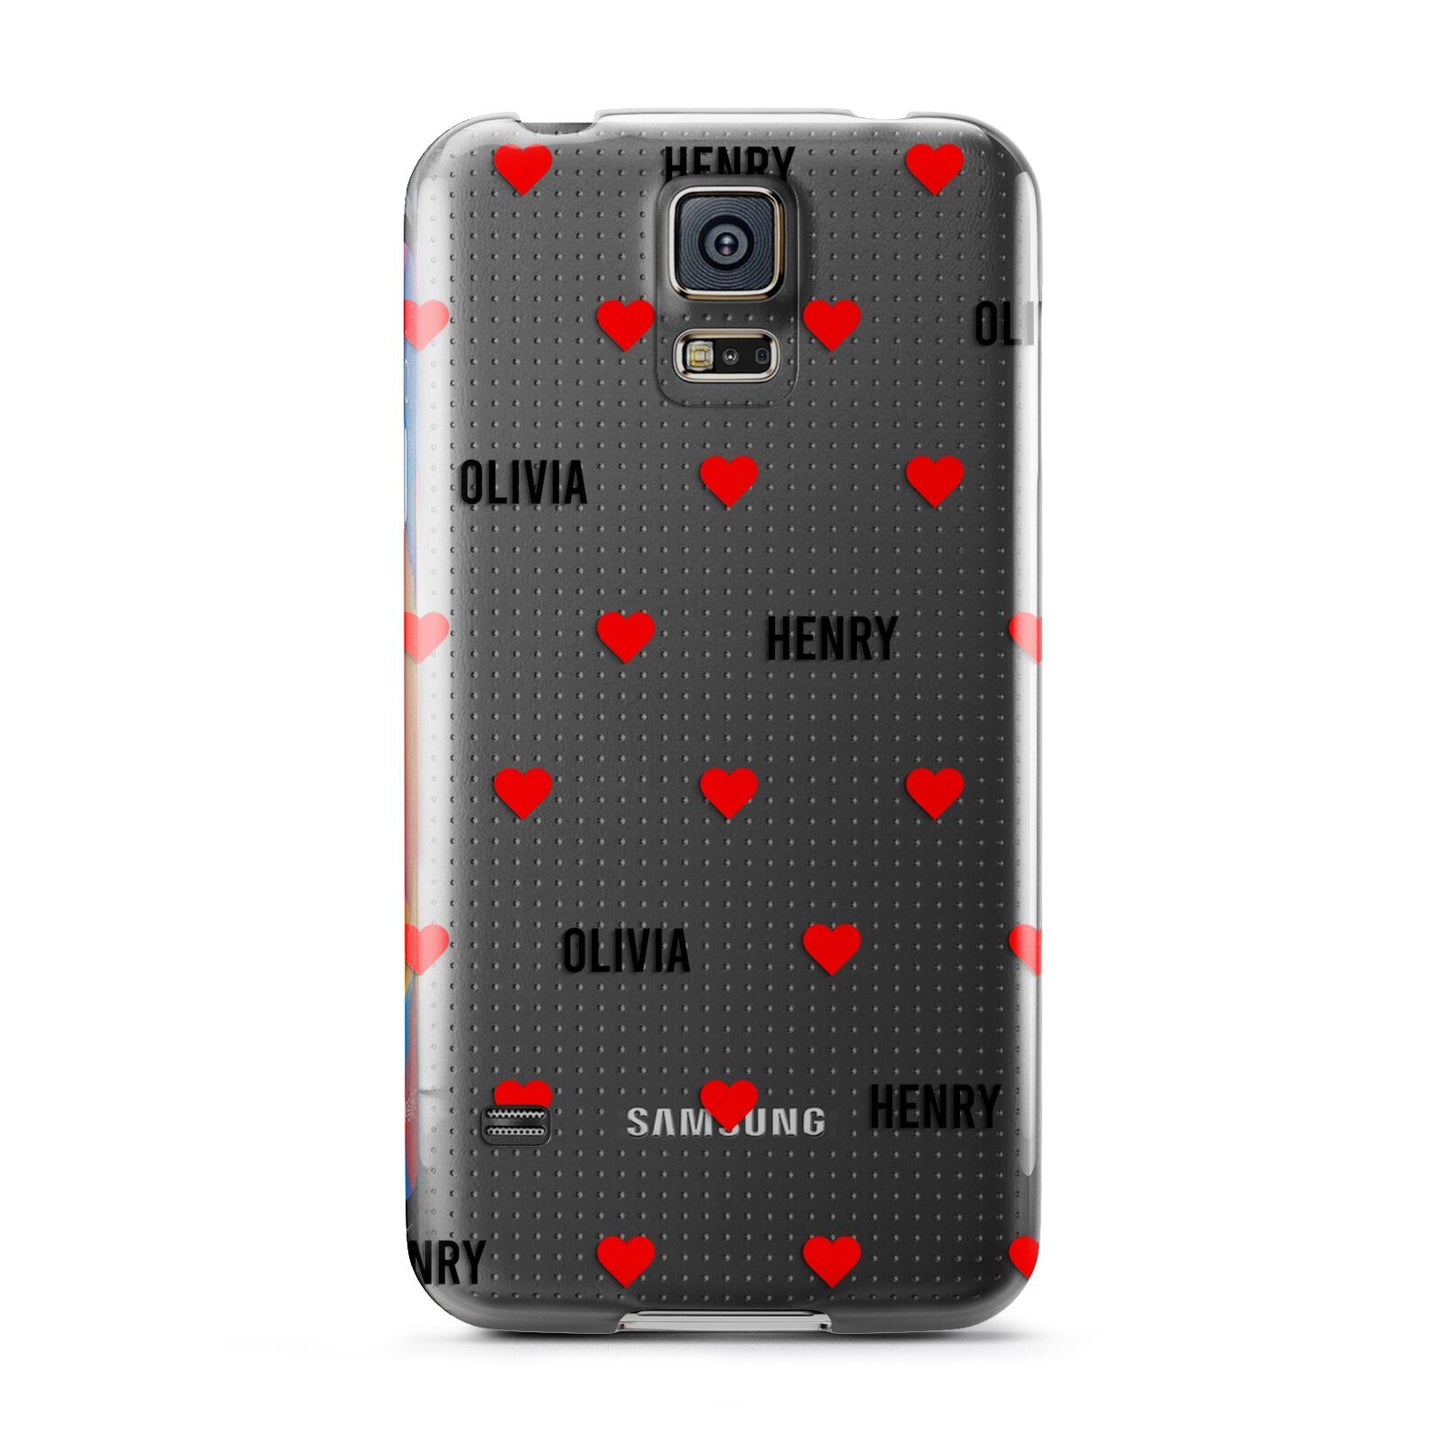 Red Hearts with Couple s Names Samsung Galaxy S5 Case